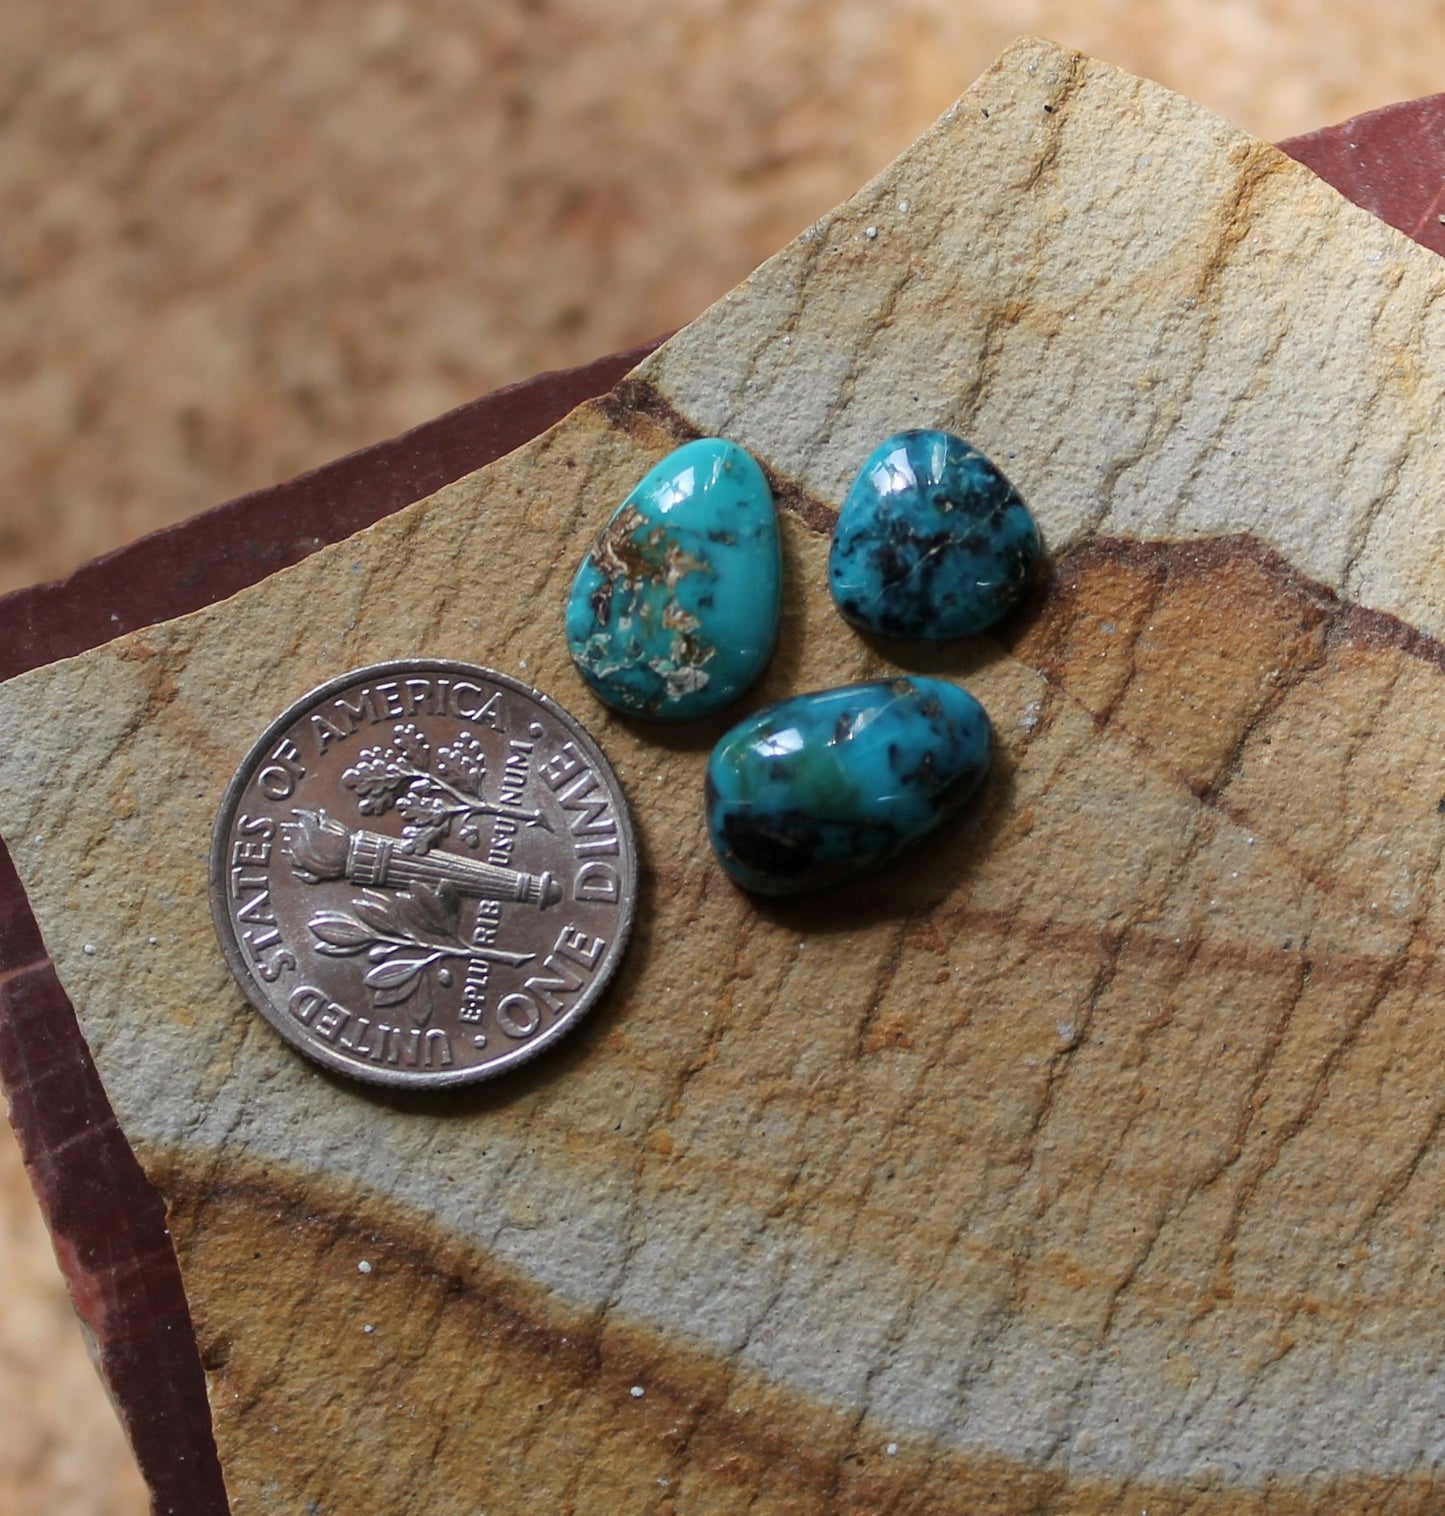 A trio of natural blue McGinnis turquoise cabochons